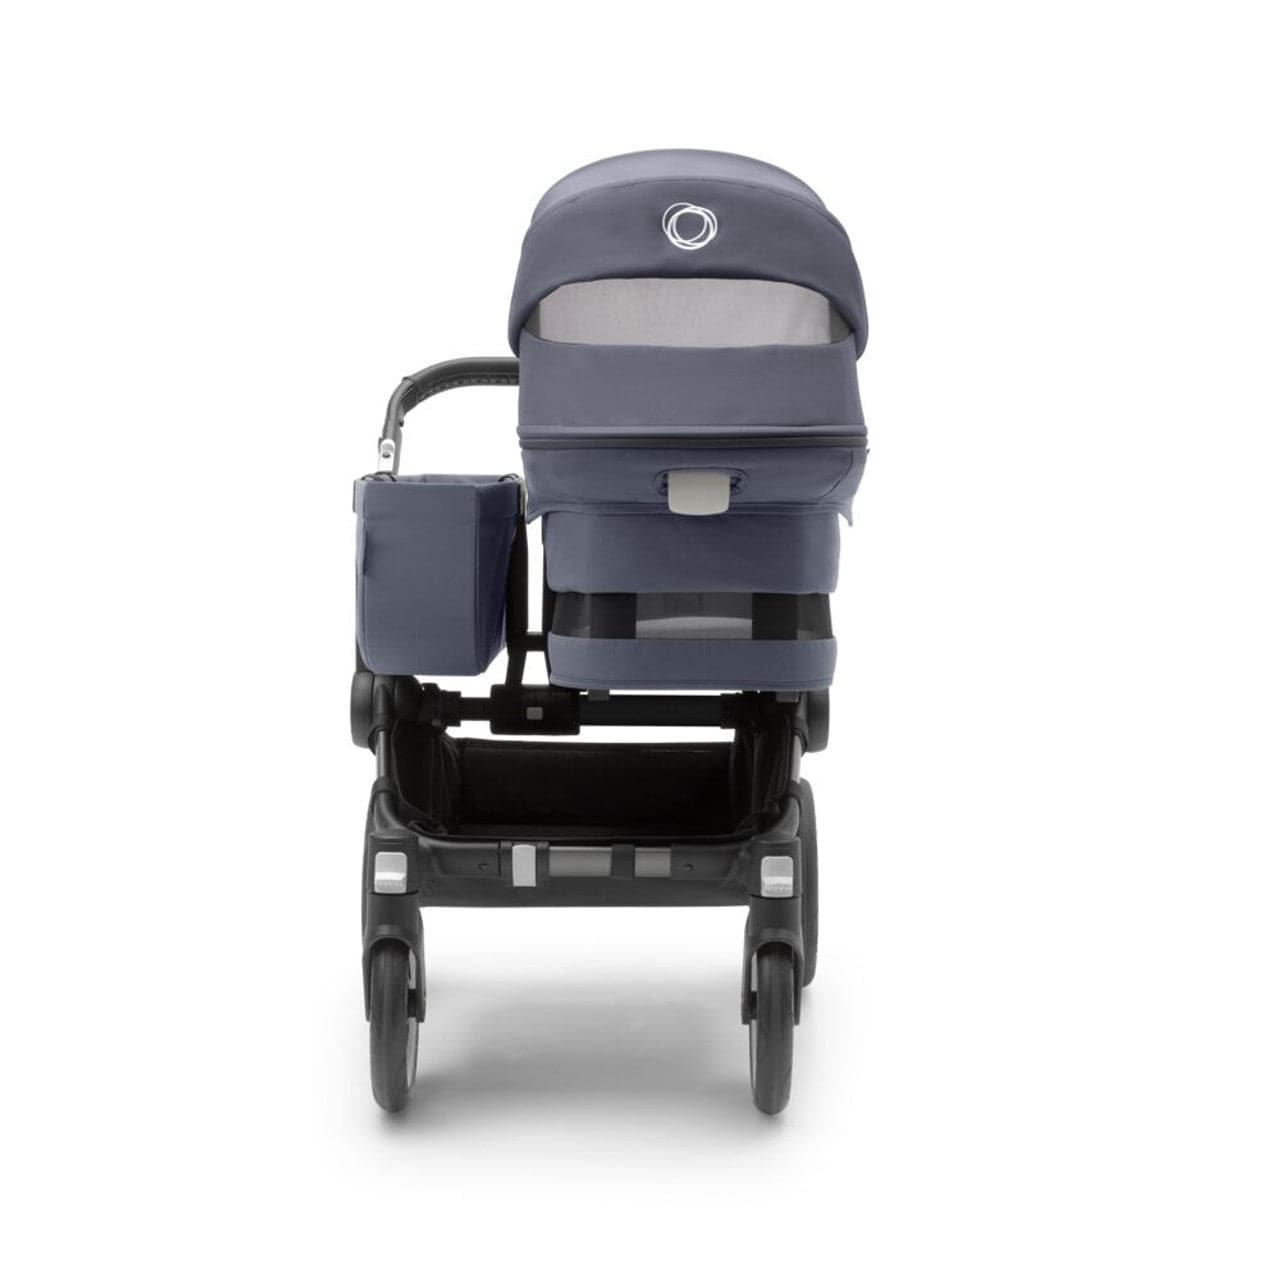 Bugaboo Donkey 5 Duo Pushchair Complete - Graphite/Stormy Blue - For Your Little One